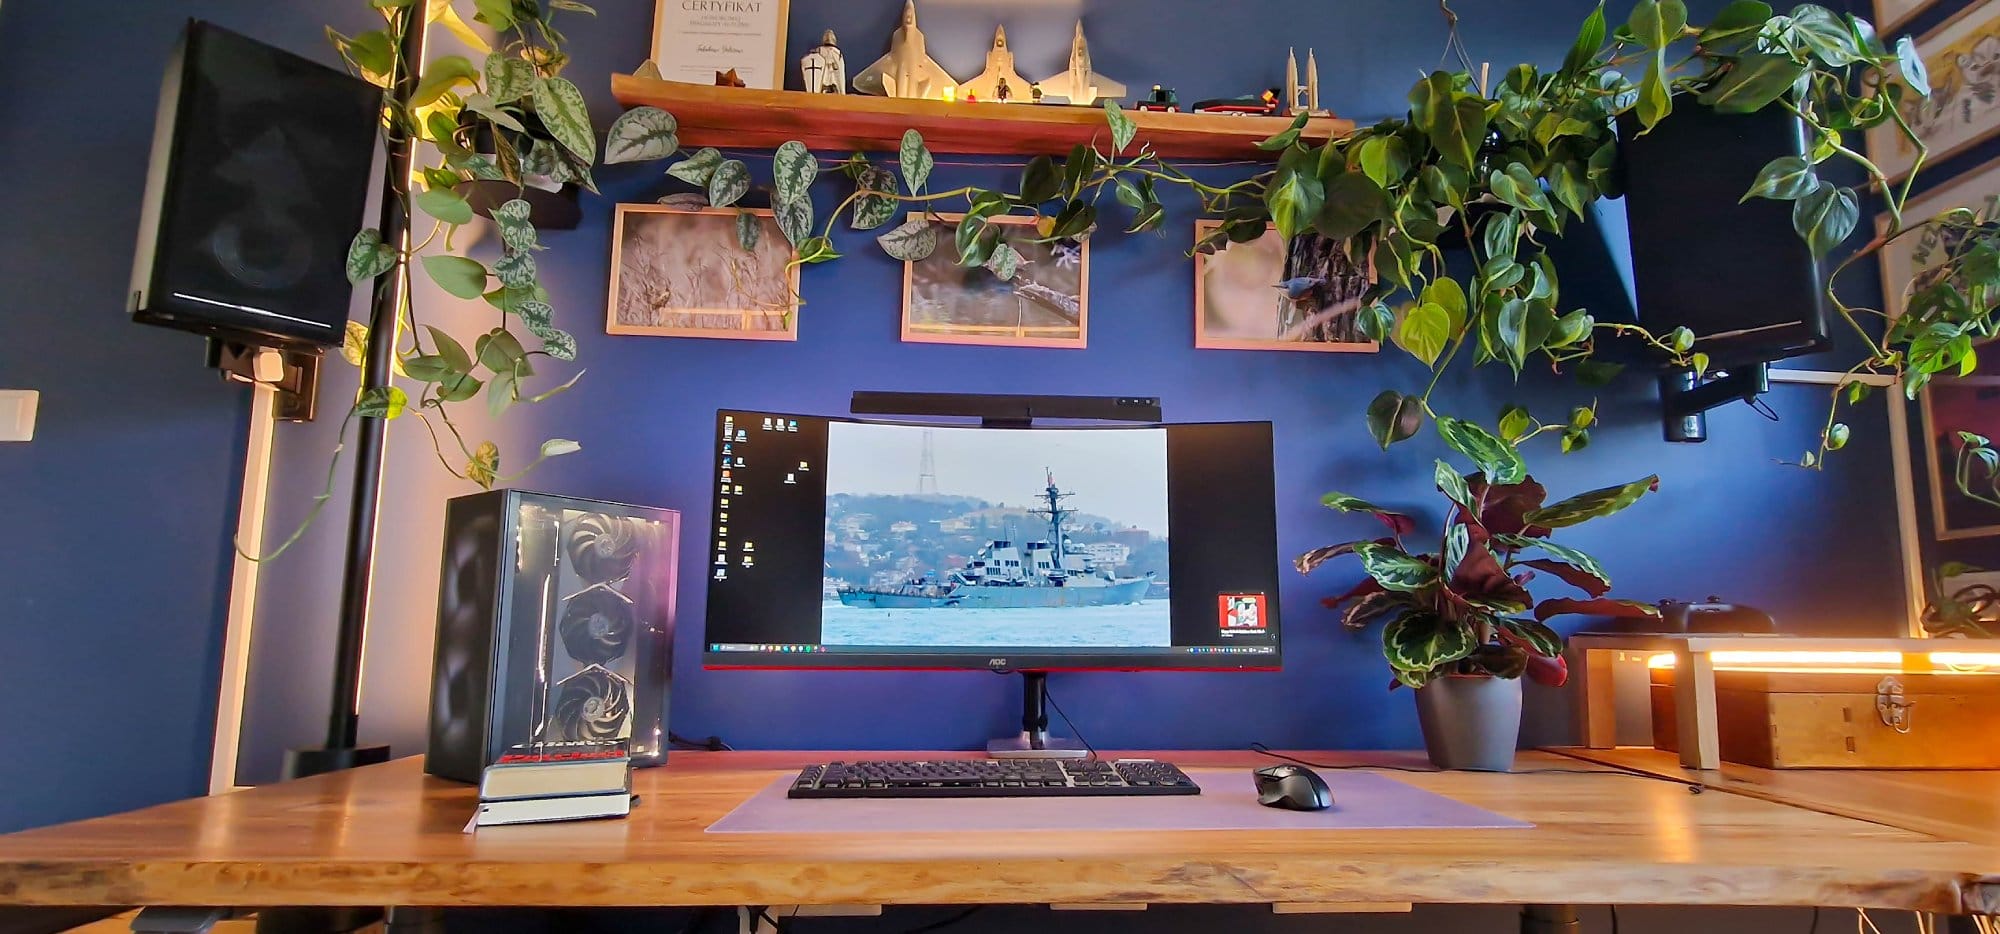 A serene and stylish home office setup featuring a spacious wooden desk with a gaming monitor and lots of houseplants